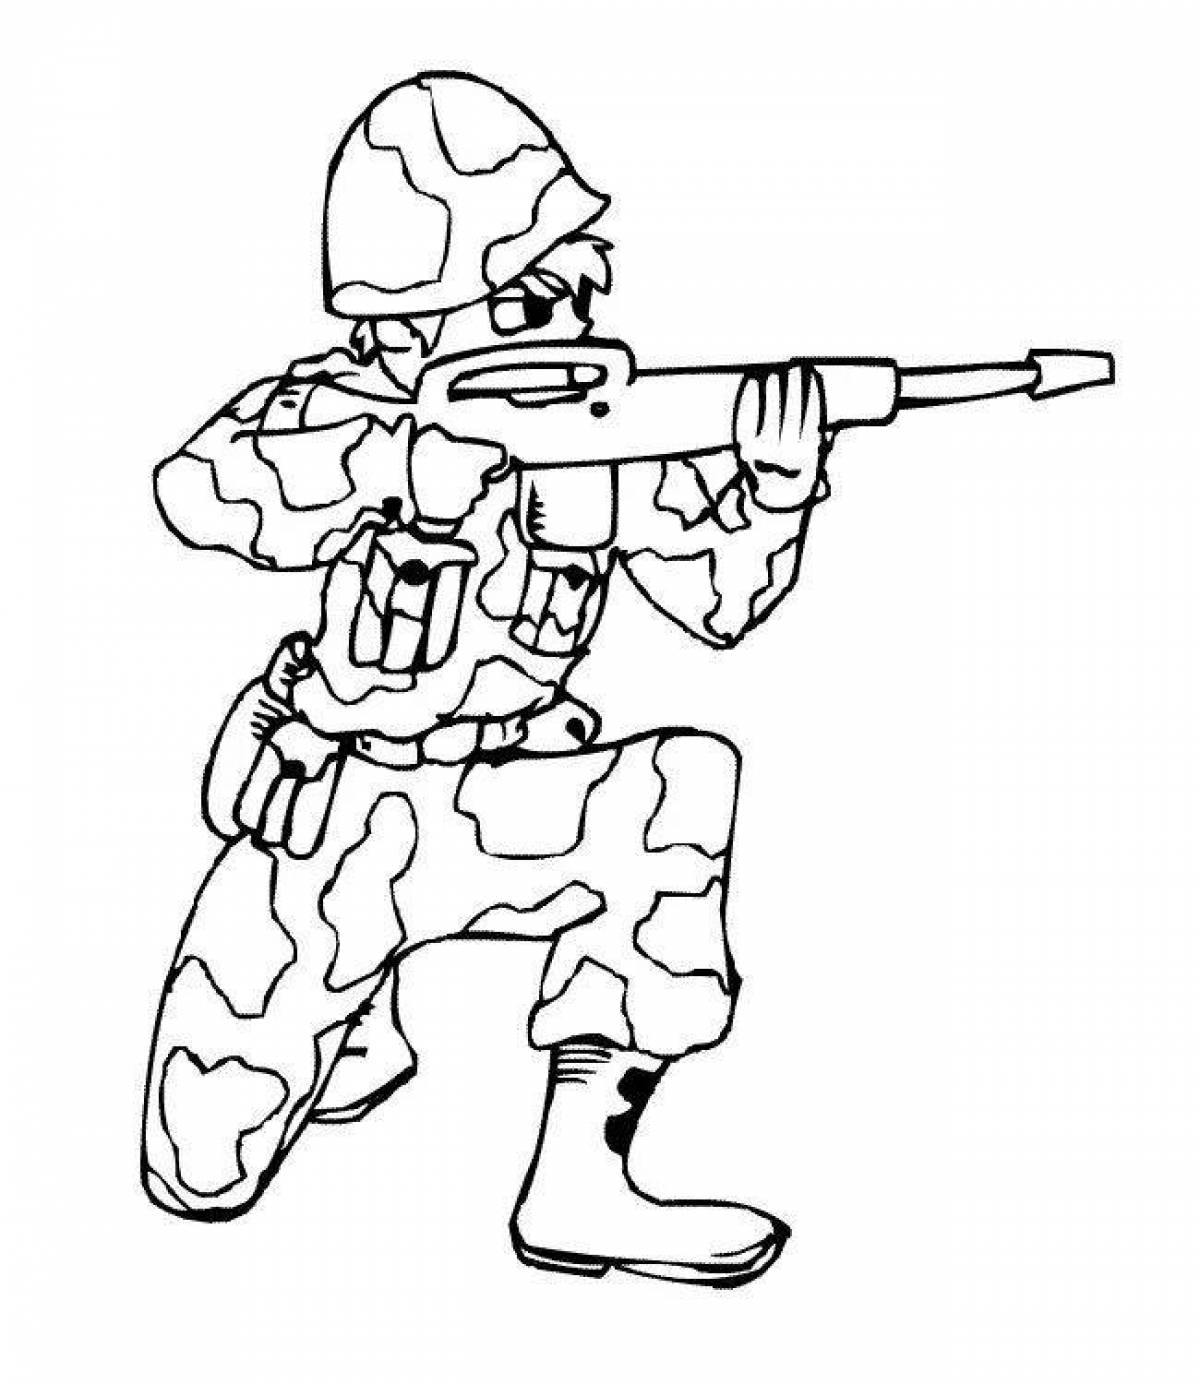 Heroic military soldiers coloring pages for boys